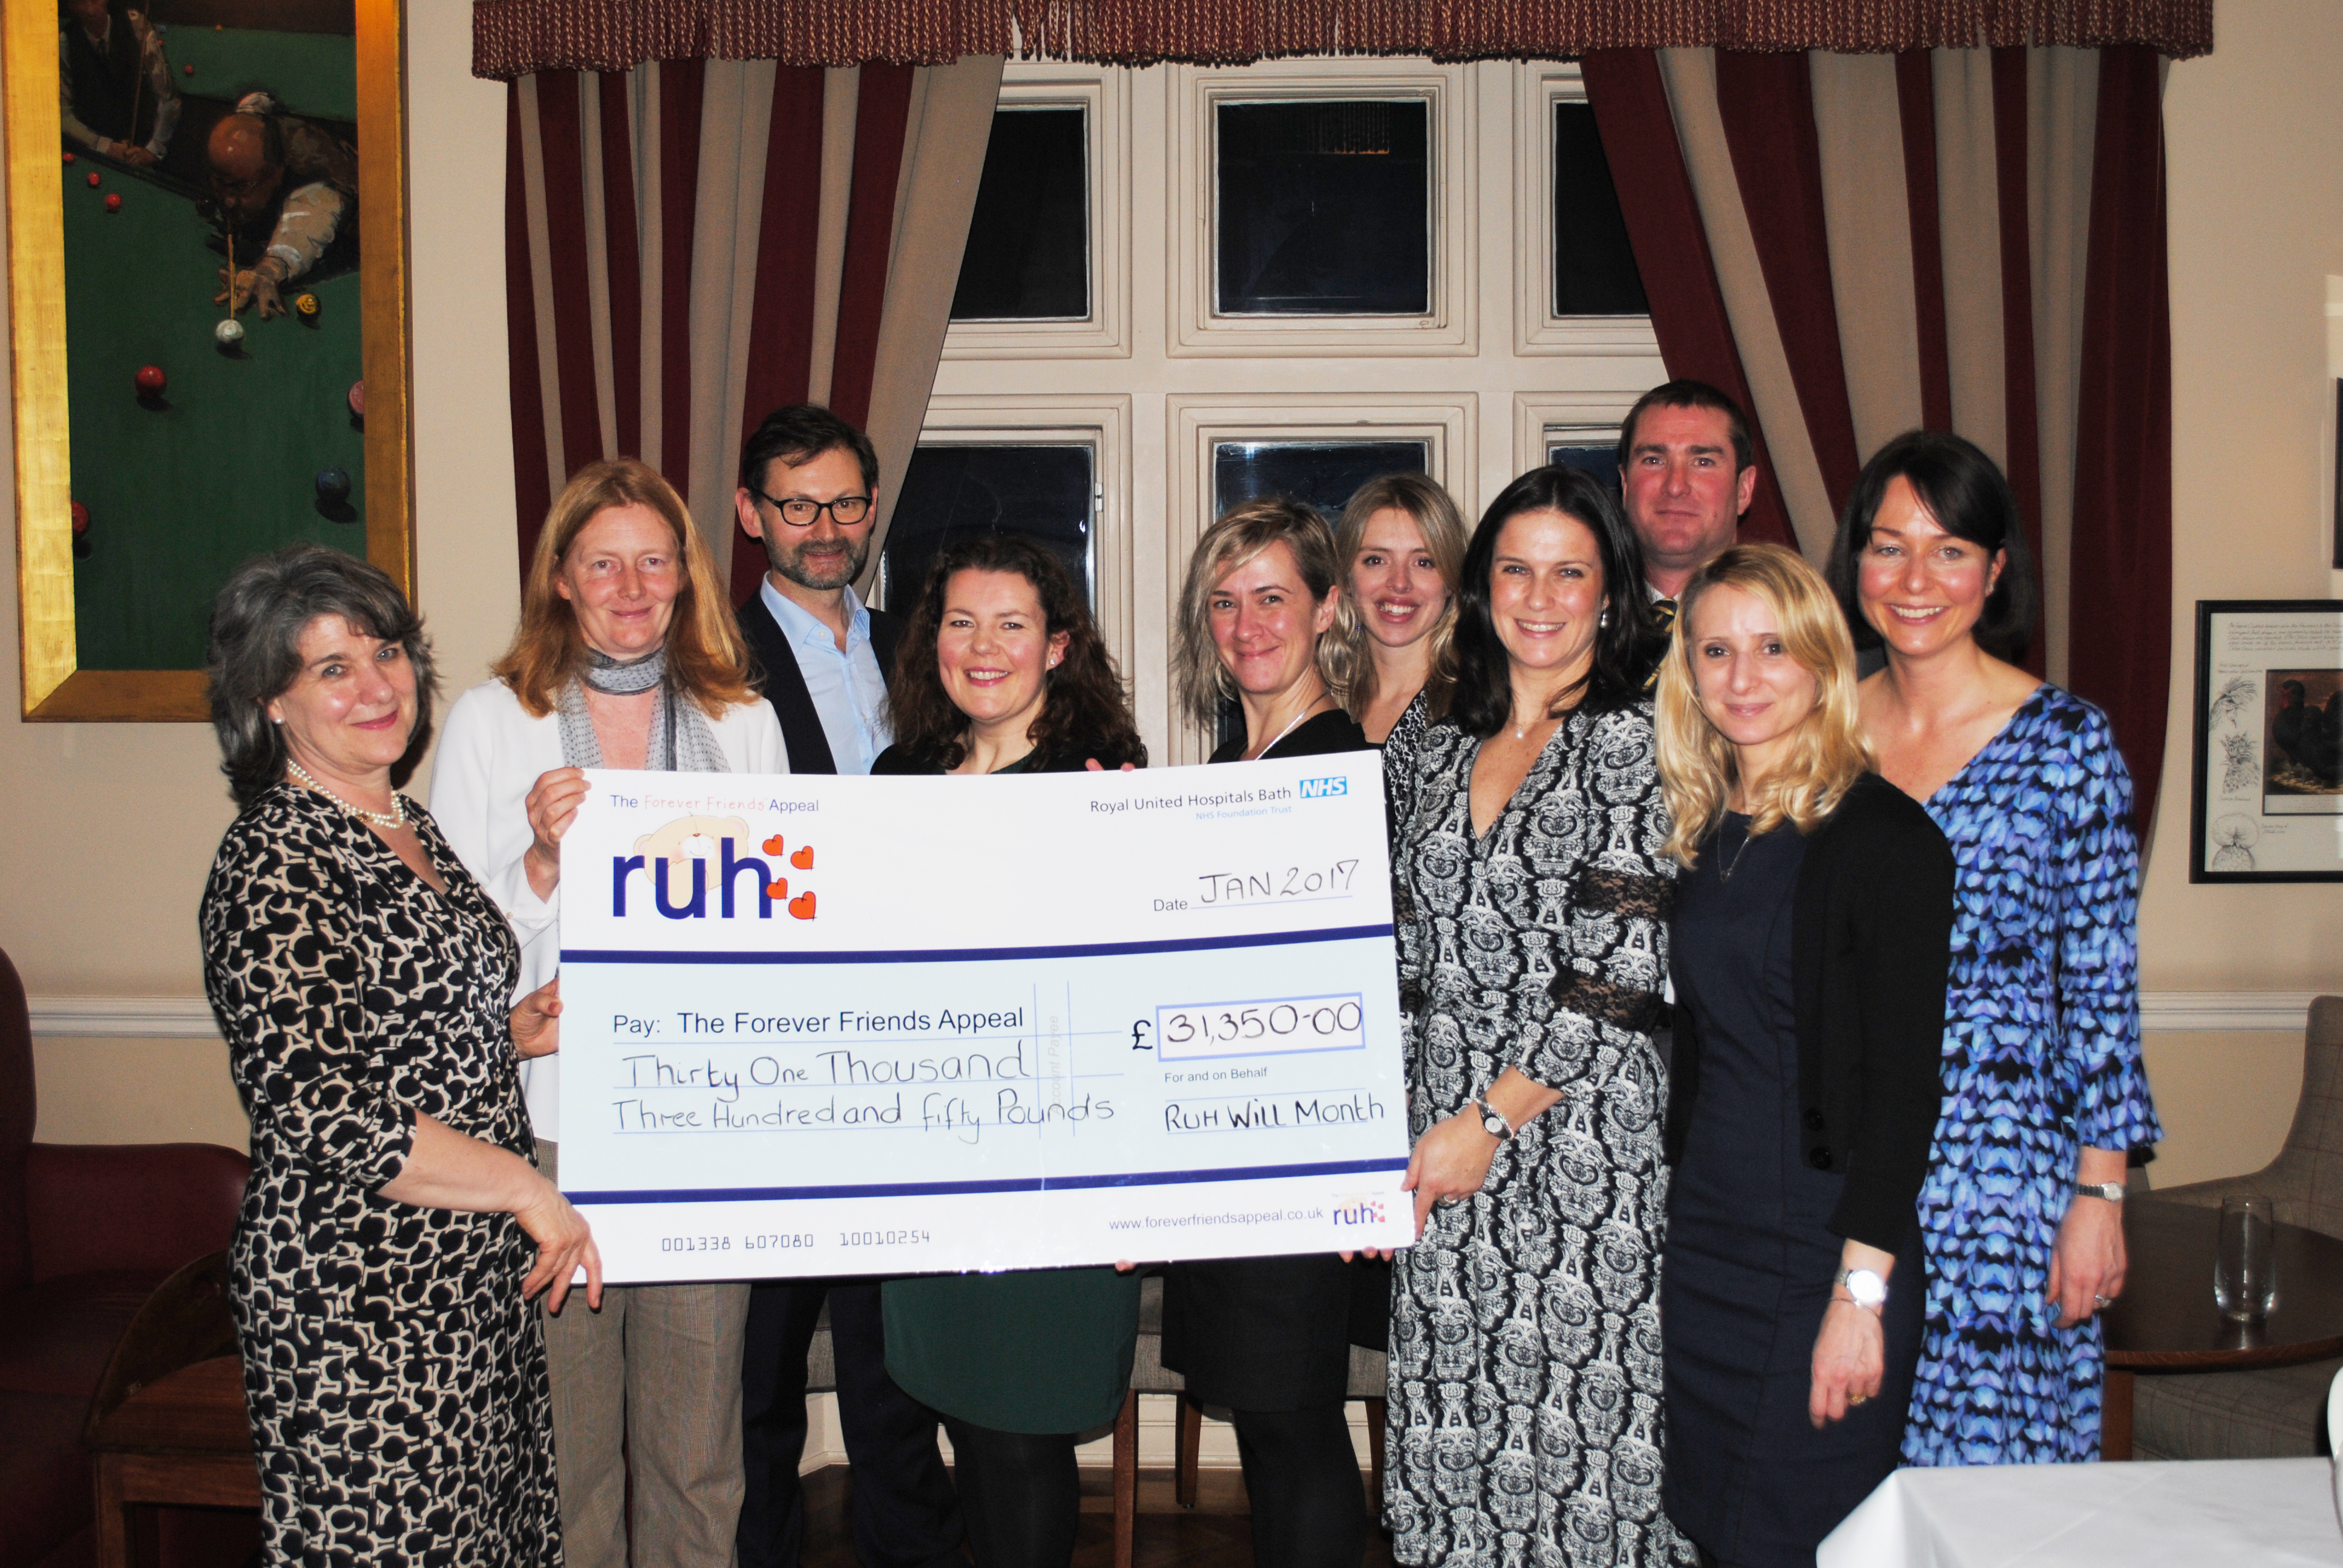 Local Solicitors raise £31,500 for the RUH Make a Will Month September